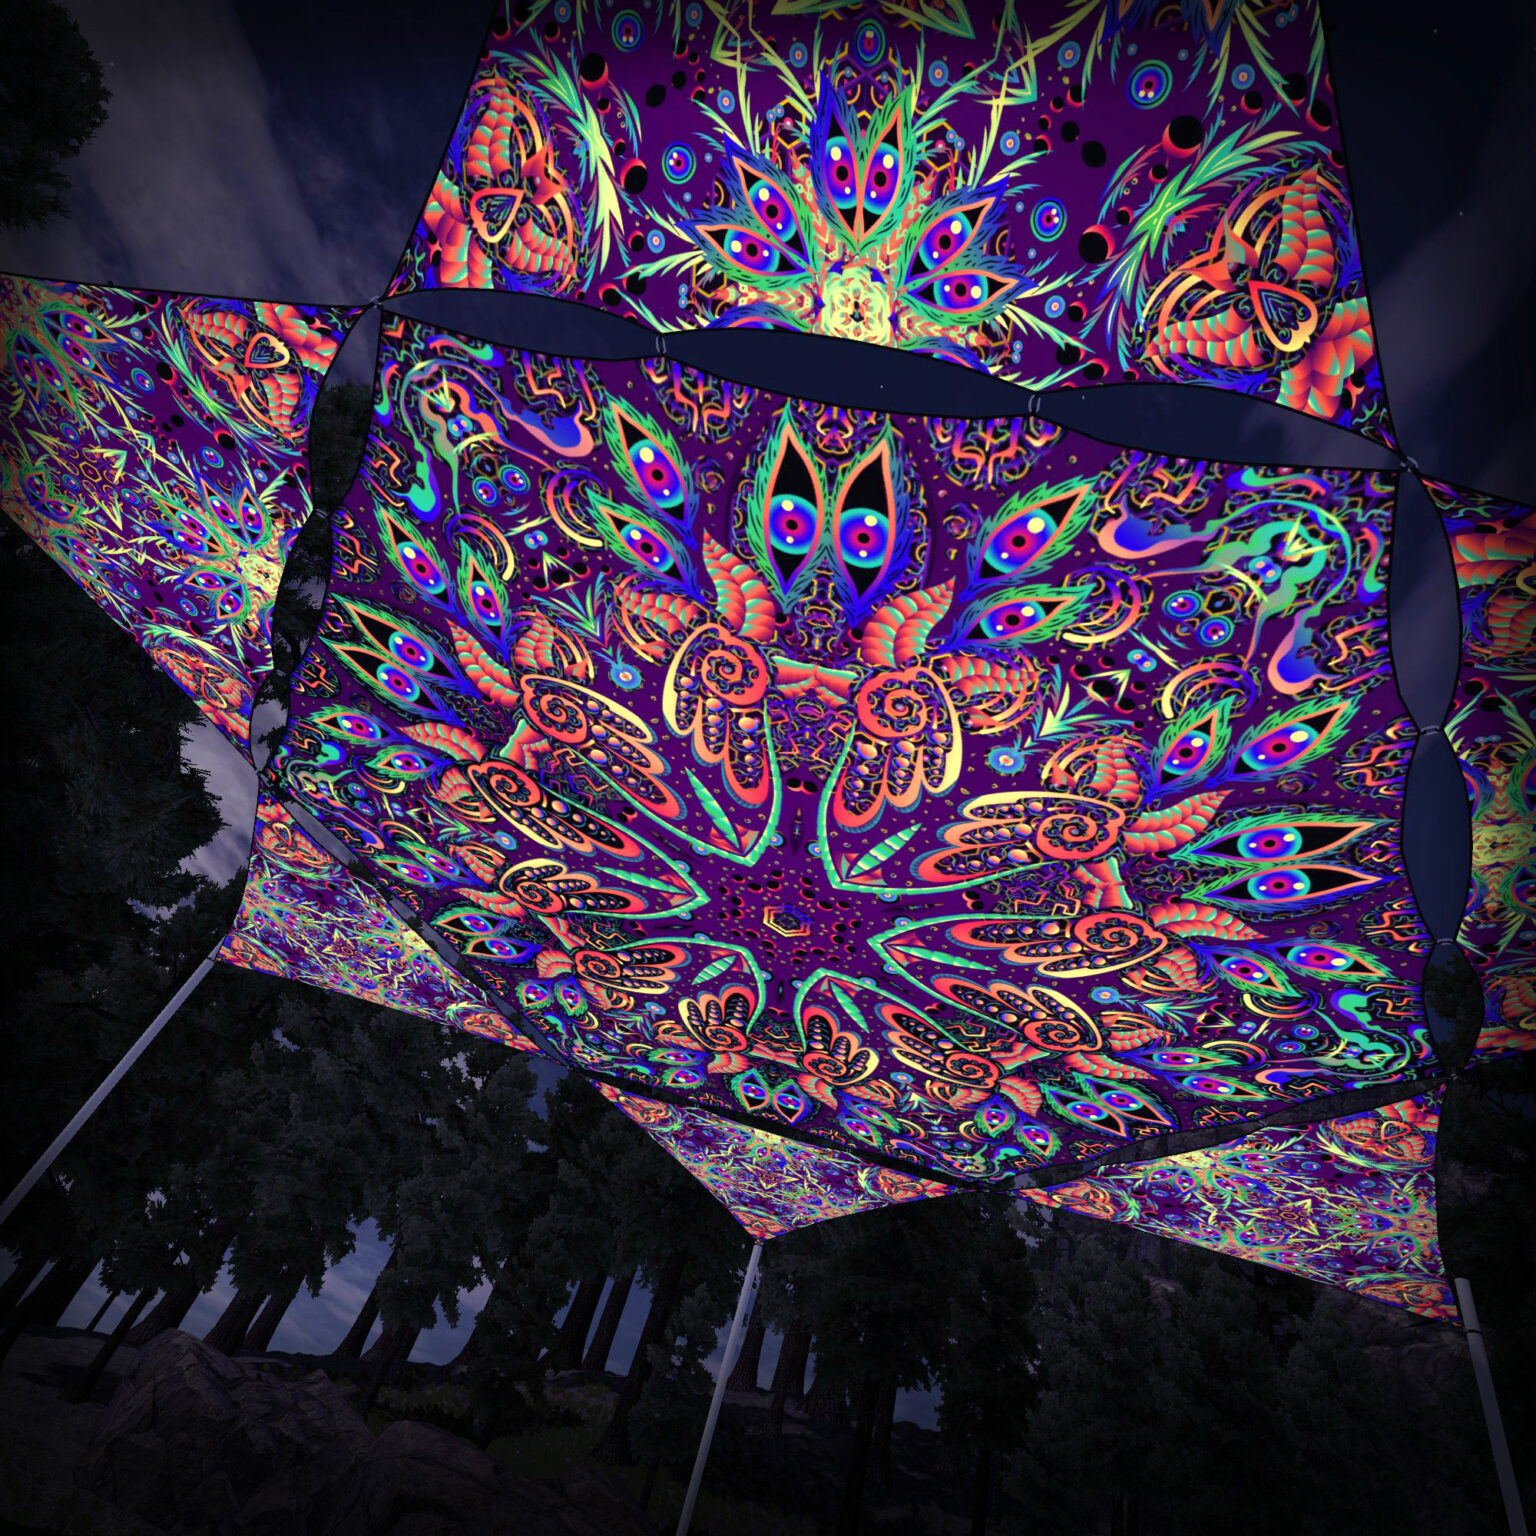 JS-HX02 Hexagon and 6 Triangles JS-TR02 - 3D-Preview - Forest - Psychedelic UV-Reactive Canopy – Ceiling Decoration